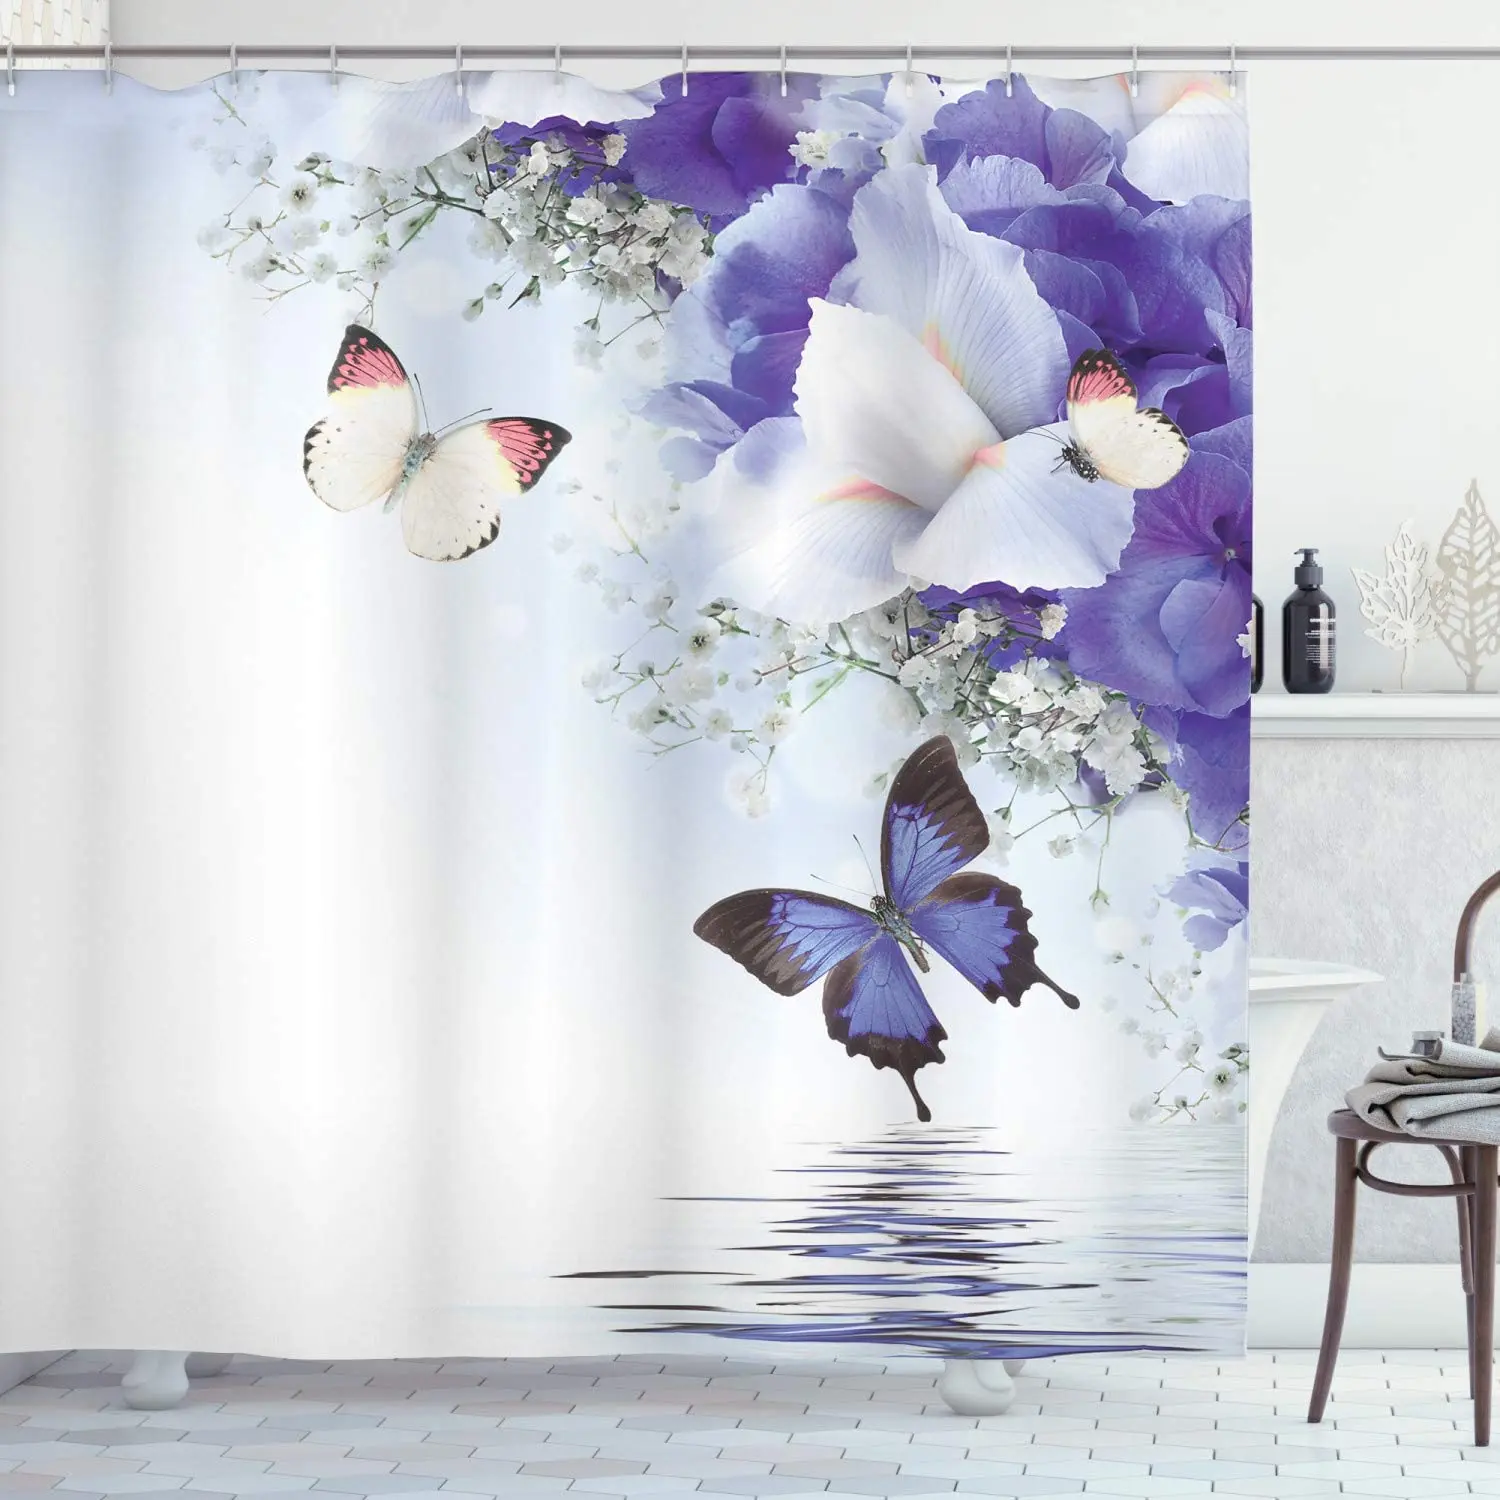 

Dark Lavender Butterfly Shower Curtain Butterflies Sailing on Sea Major Colorful Iris Flowers Fairytale Inspired